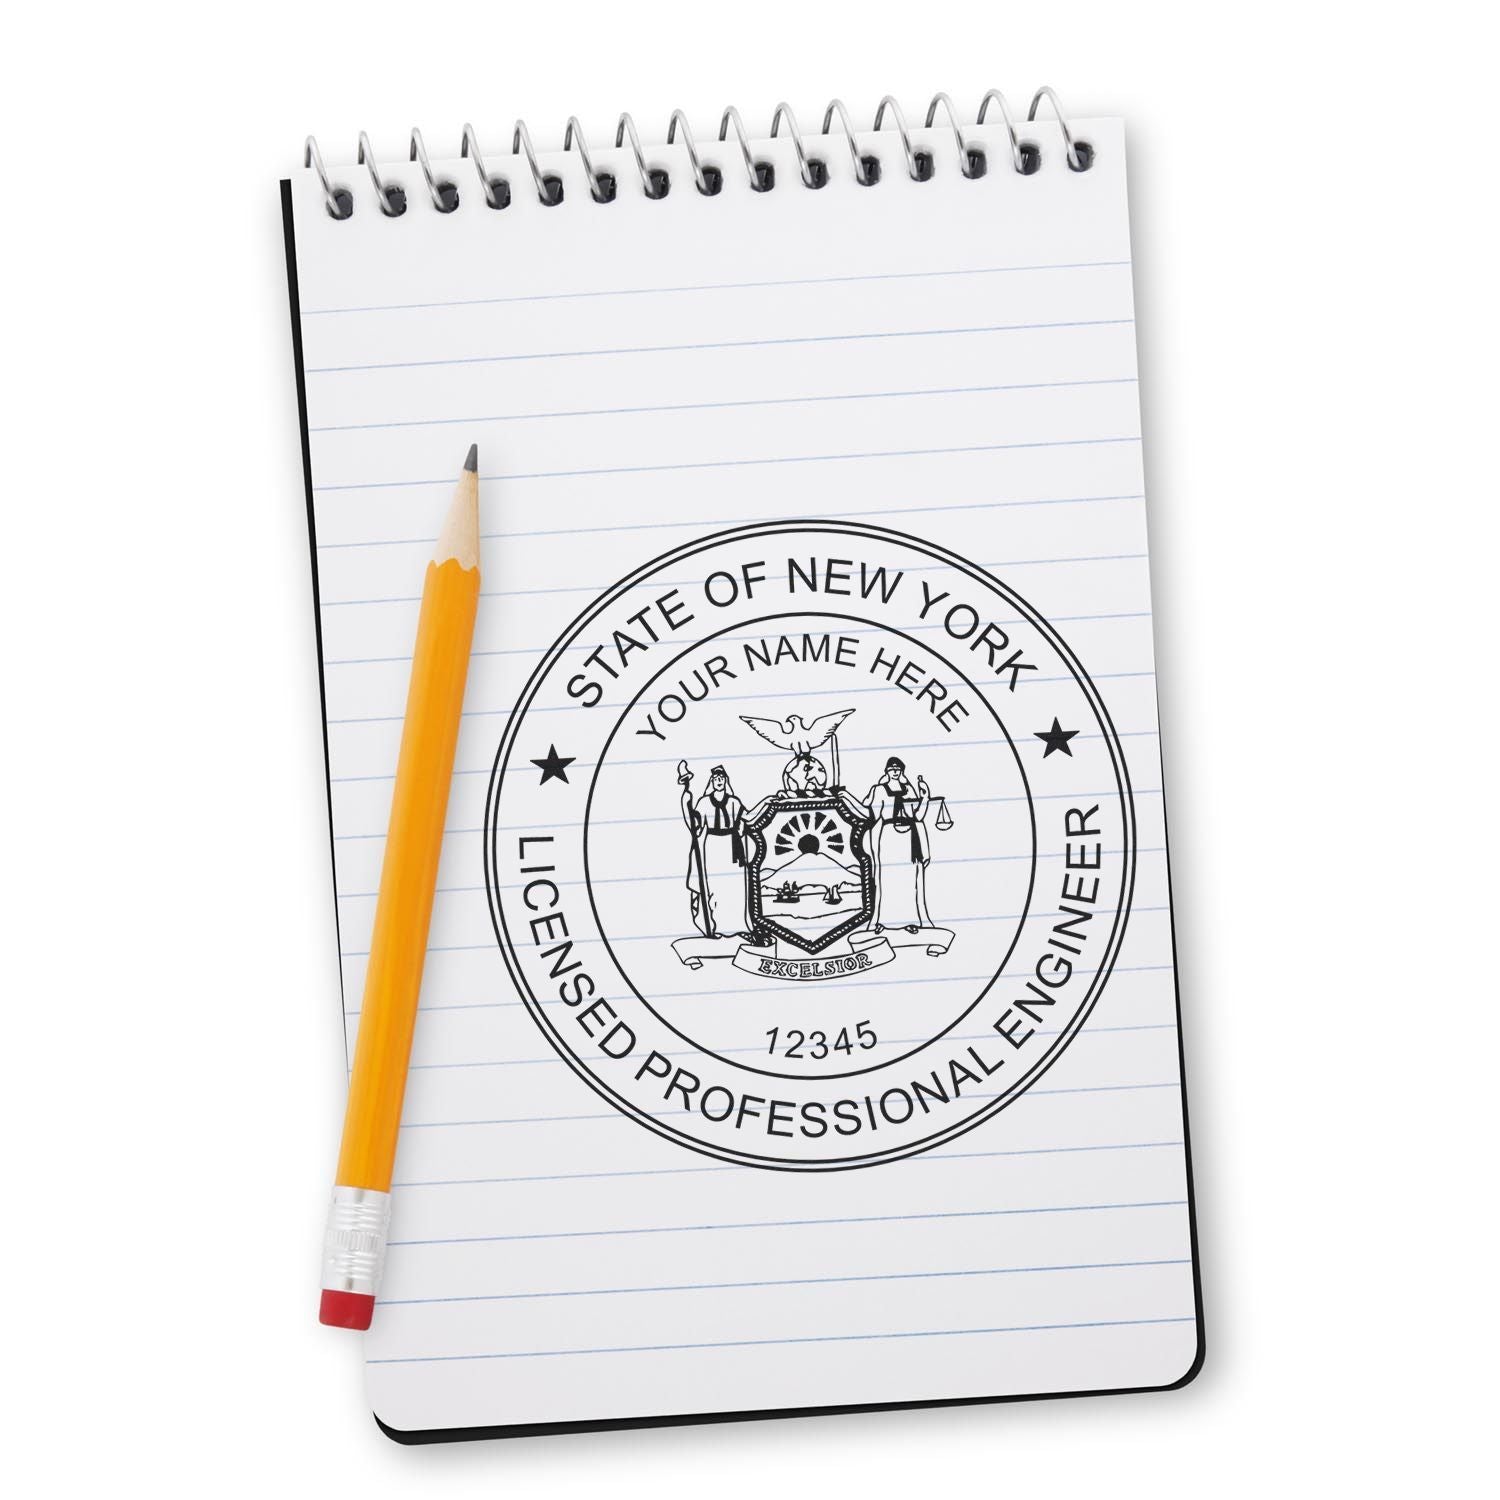 The main image for the Self-Inking New York PE Stamp depicting a sample of the imprint and electronic files